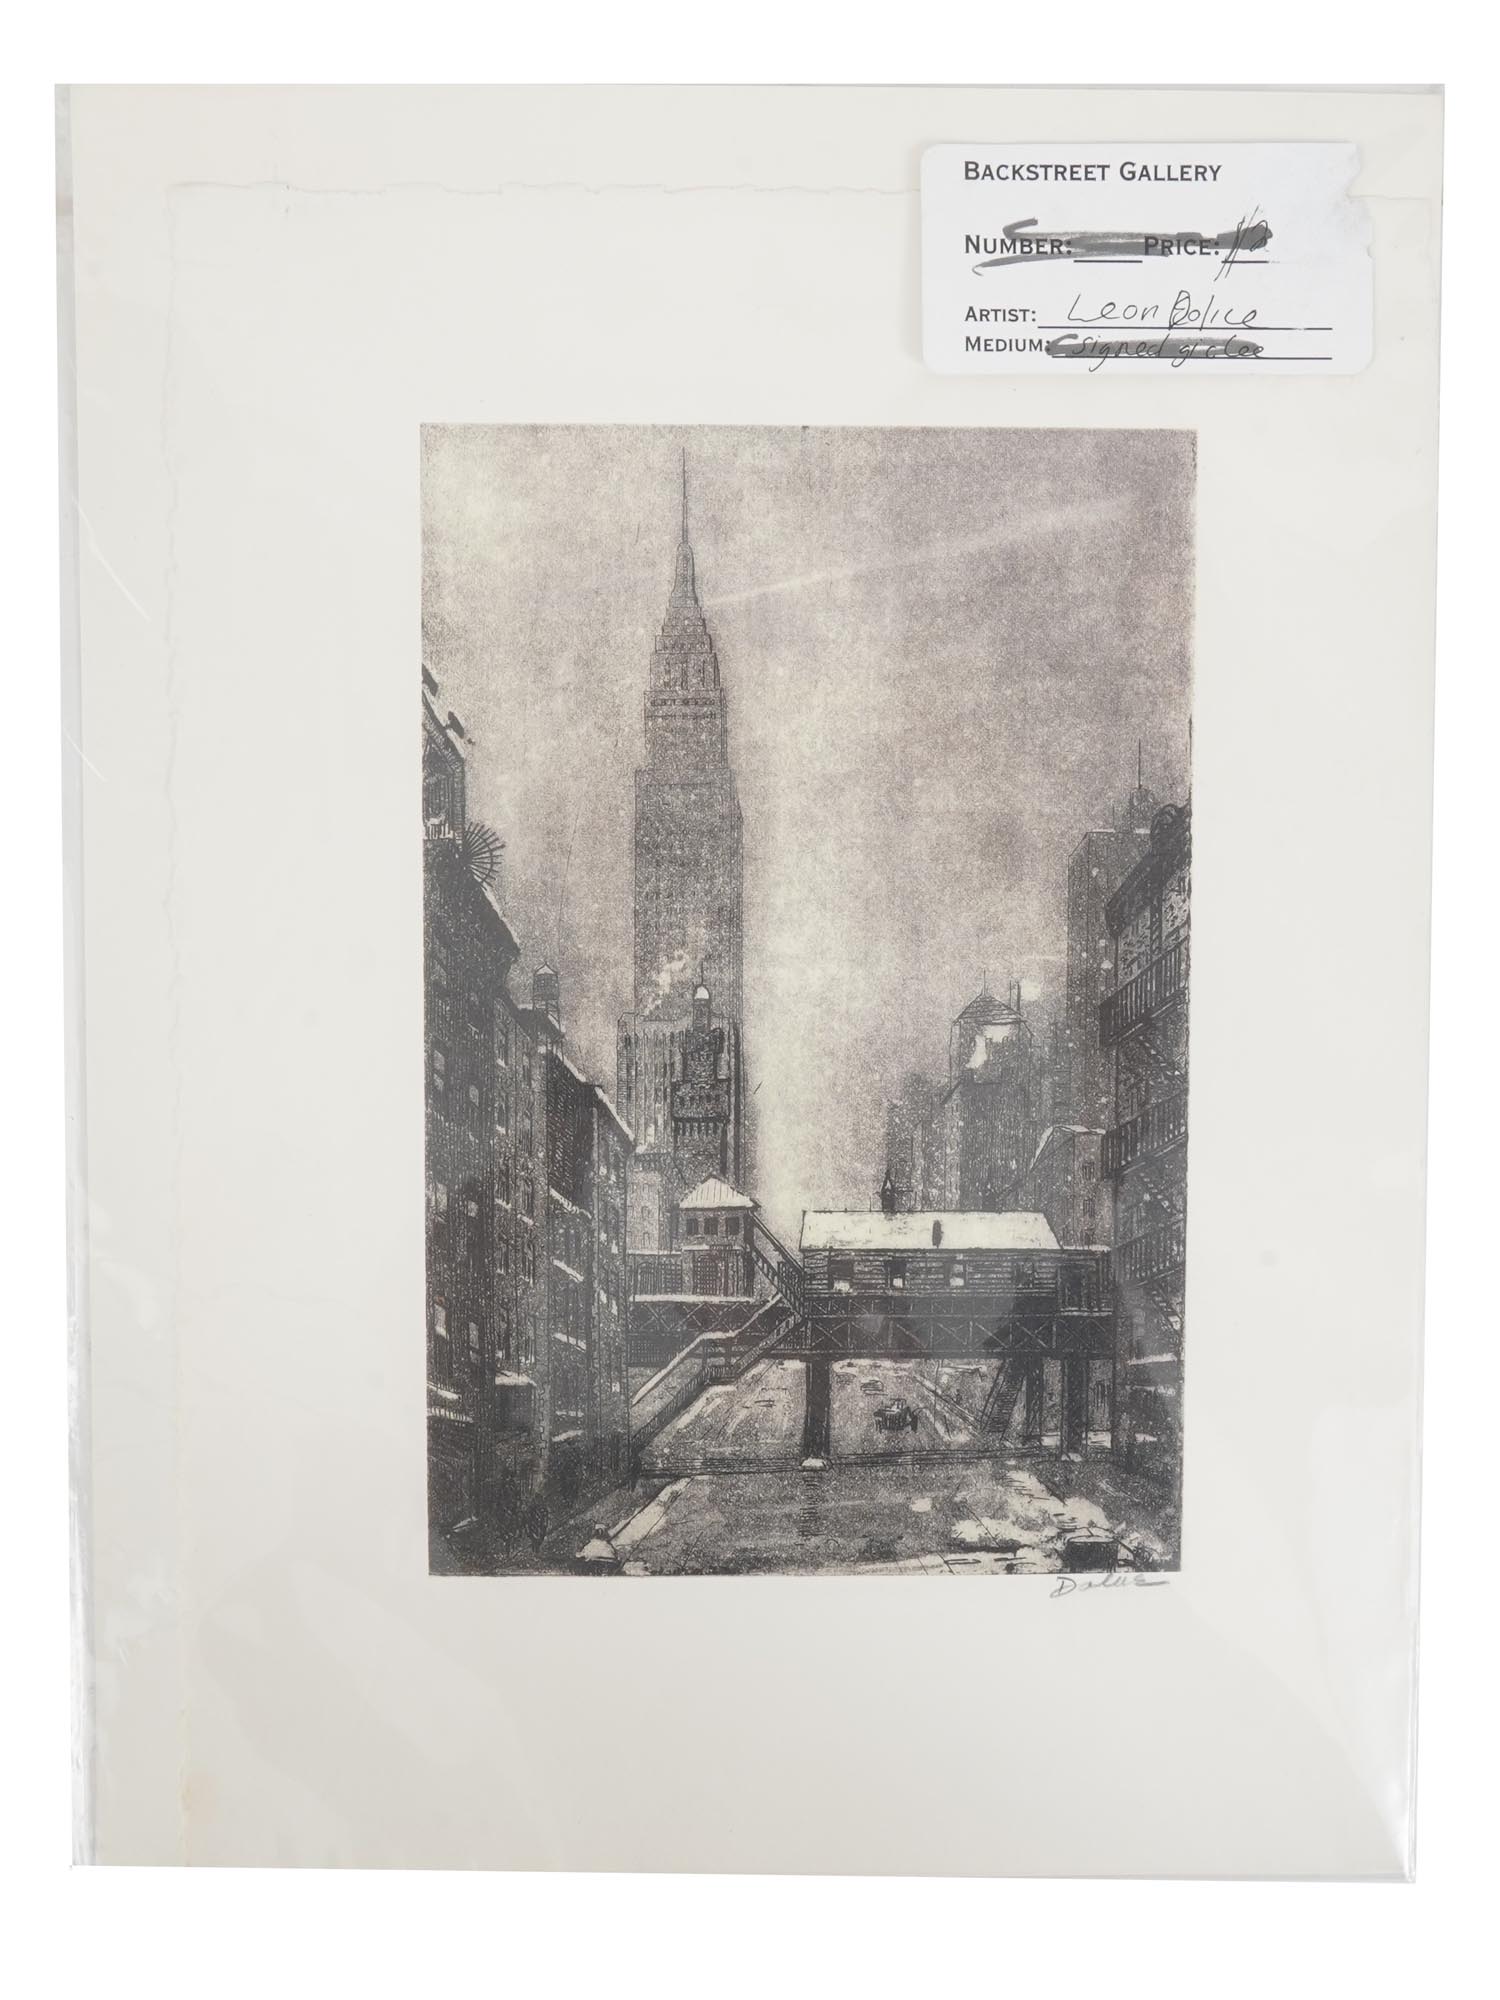 AMERICAN NEW YORK CITY ETCHING BY LEON DOLICE PIC-0